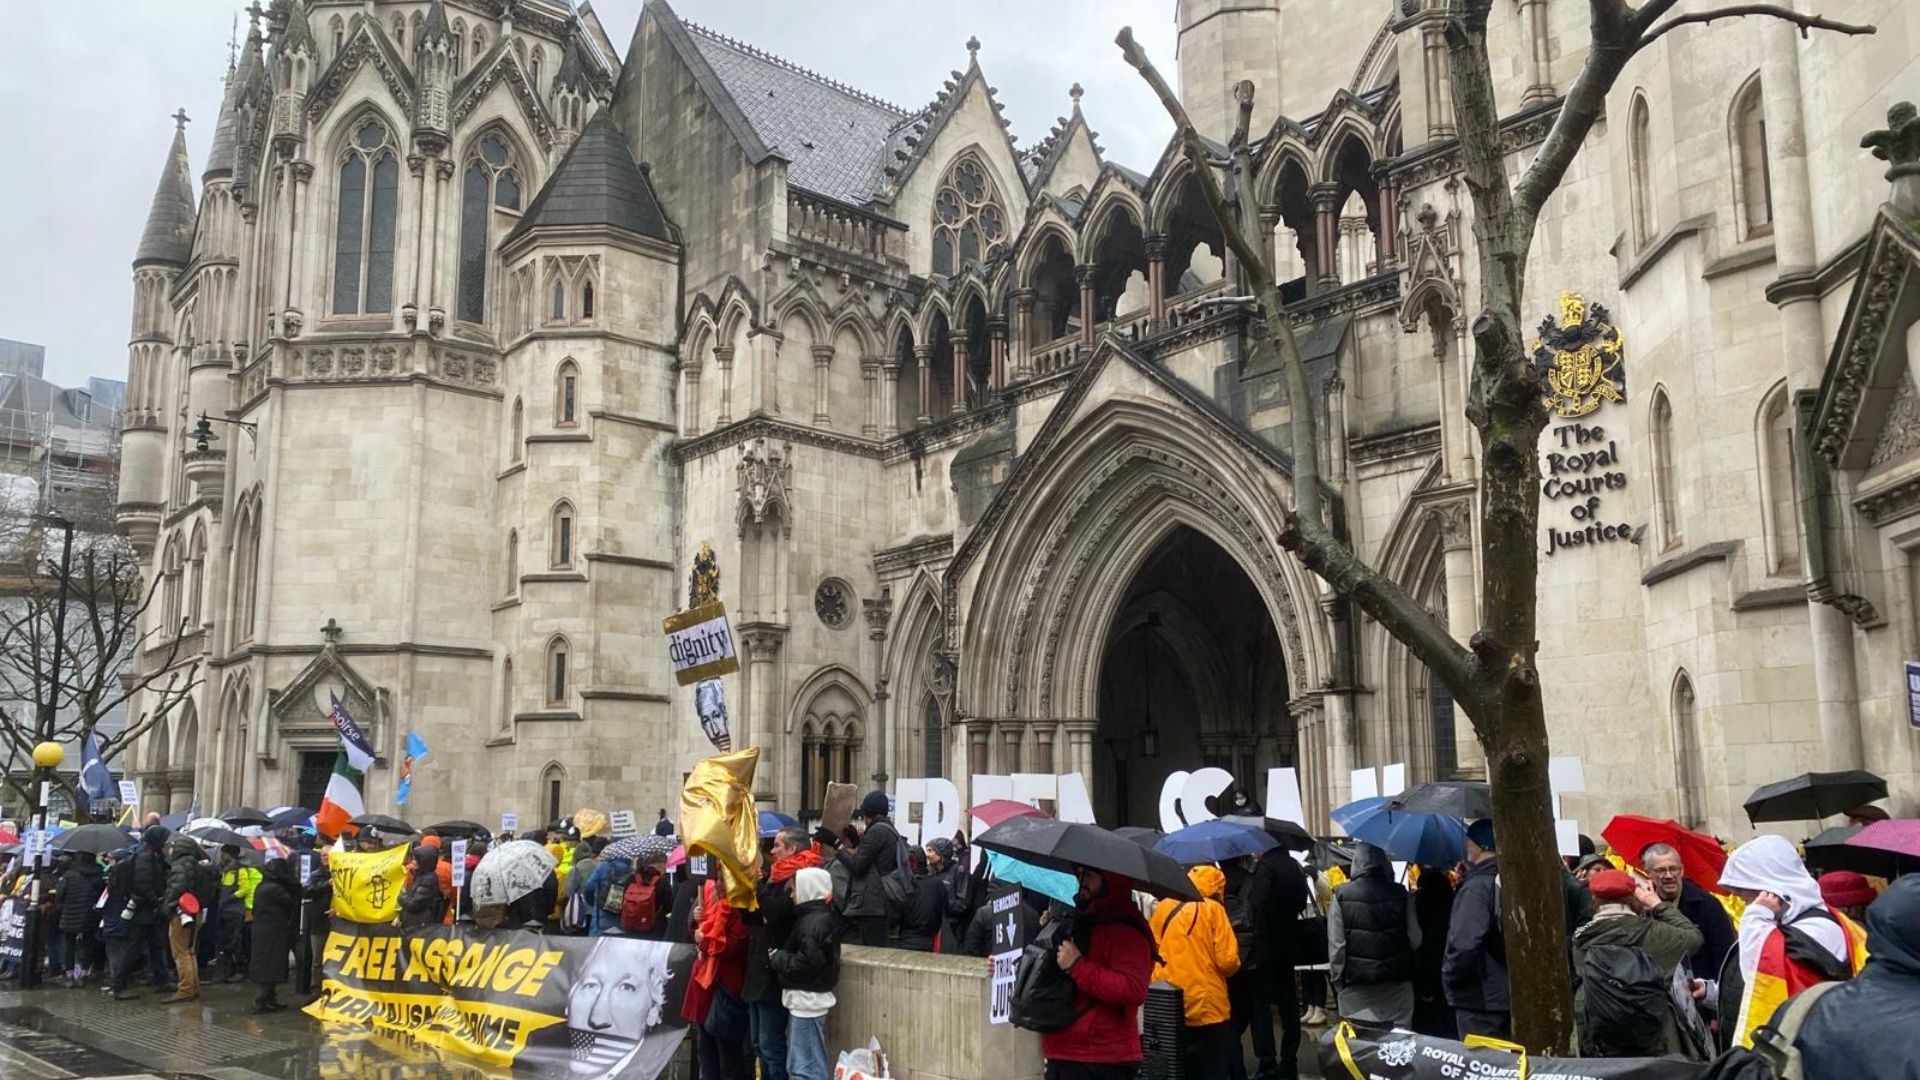 Assange supporters have assembled in their hundreds at London's High Court. /Iolo ap Dafydd/CGTN
